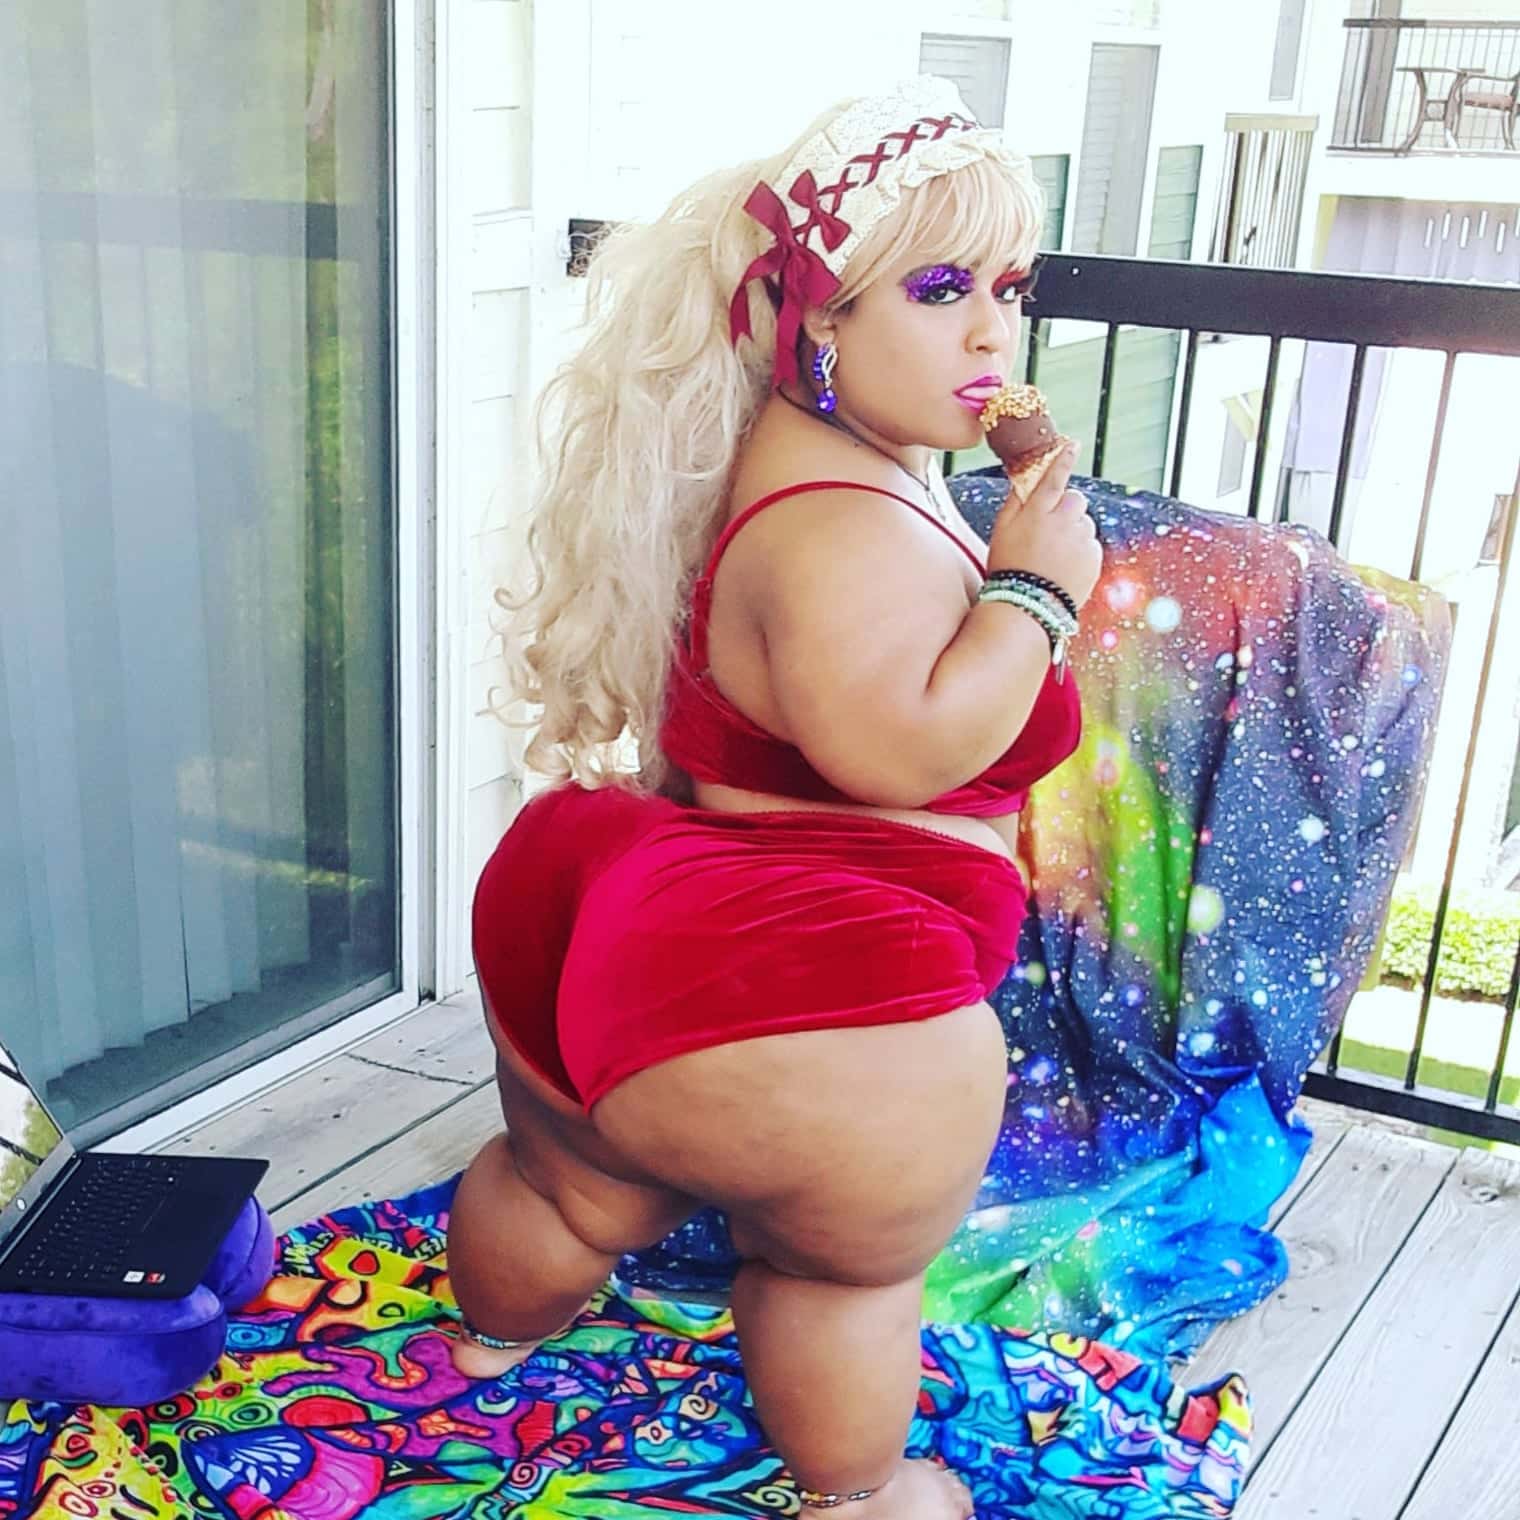 Best Midget OnlyFans Girls Of 2023 - Small and sexy!